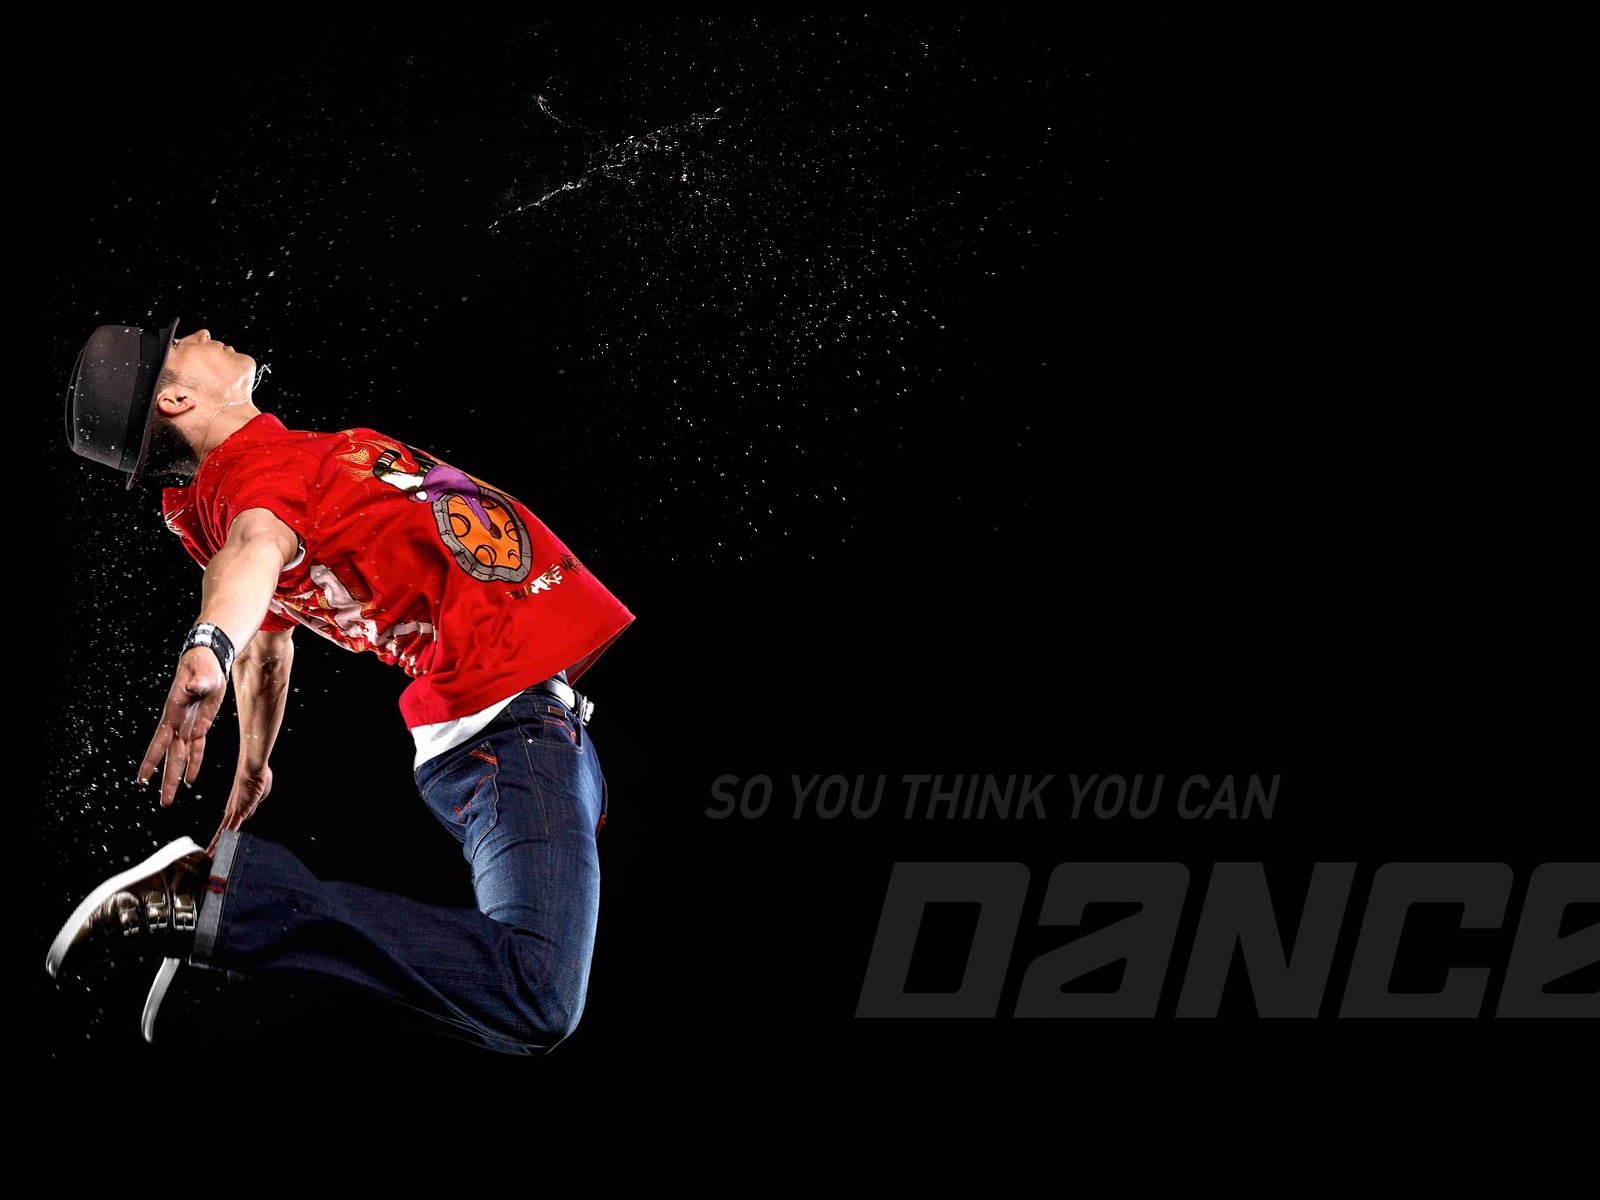 So You Think You Can Dance wallpaper (1) #6 - 1600x1200